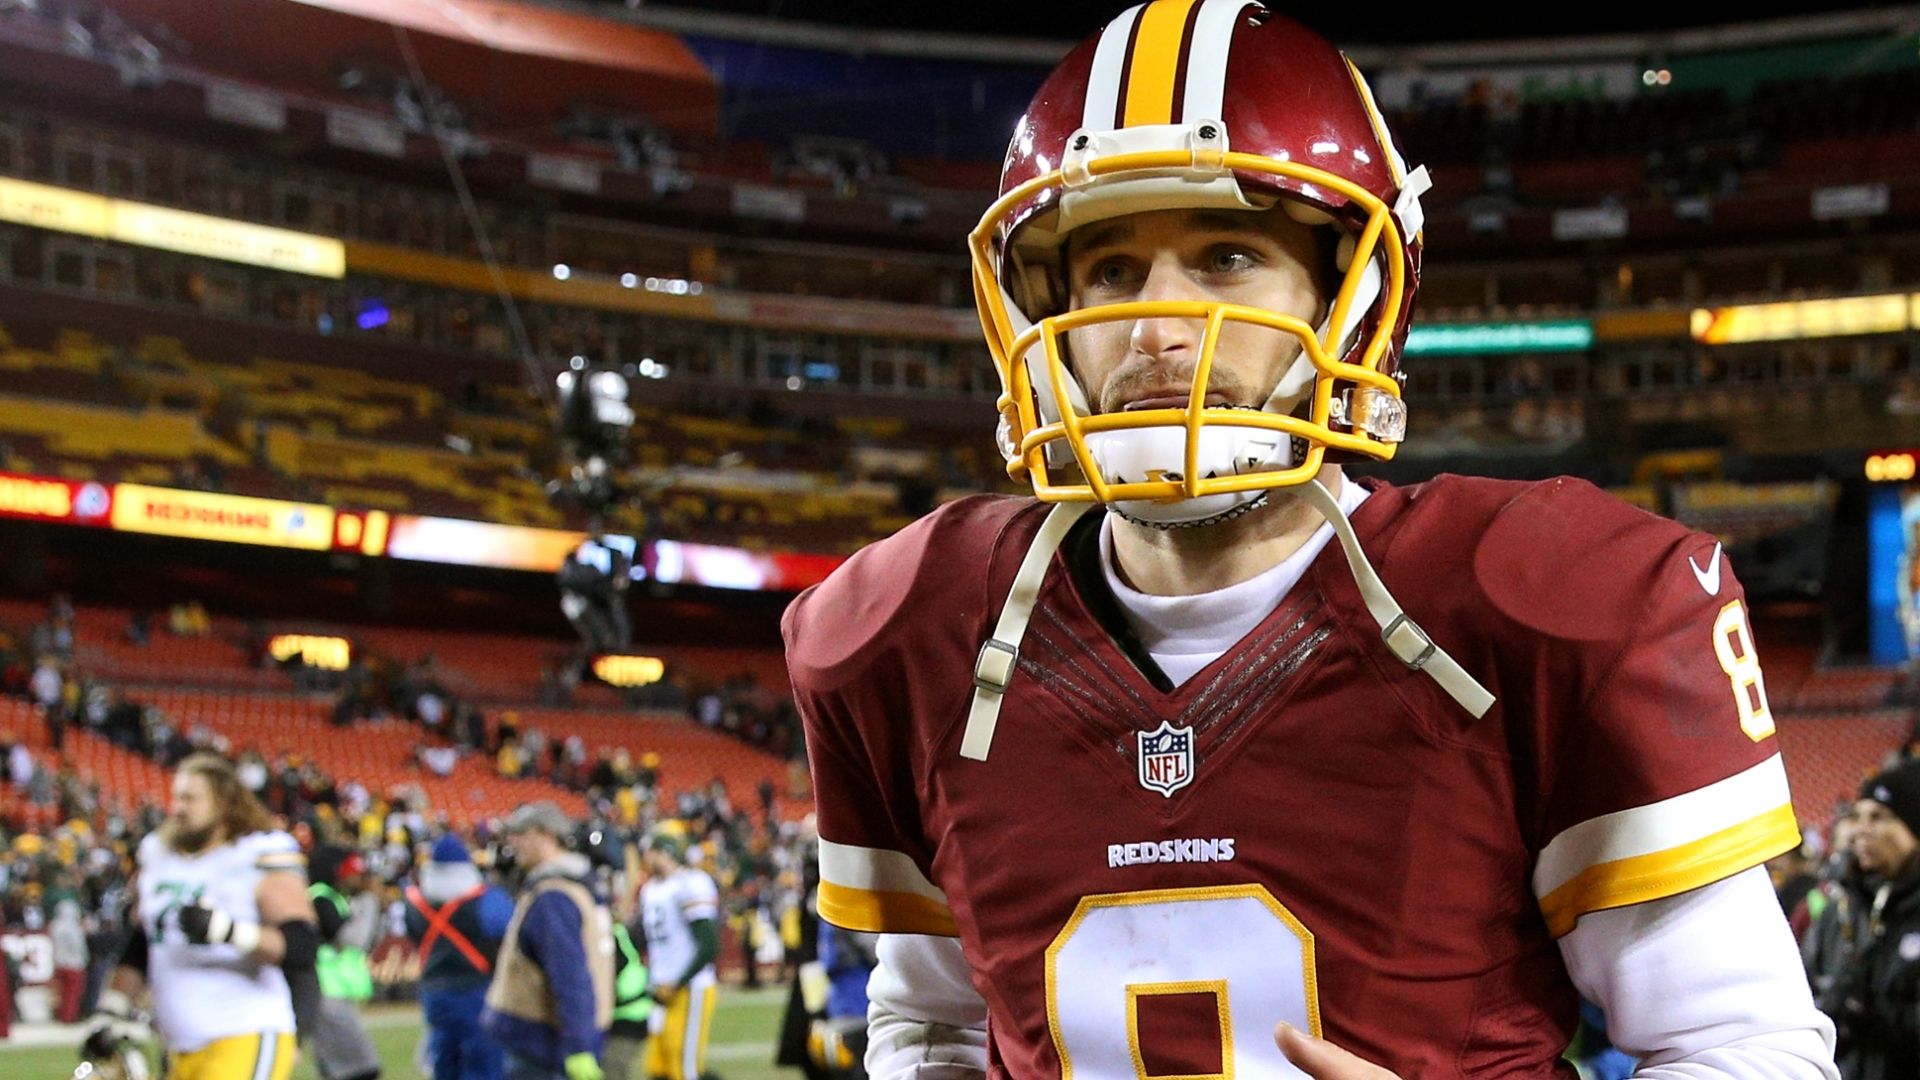 Redskins will place tag on Cousins